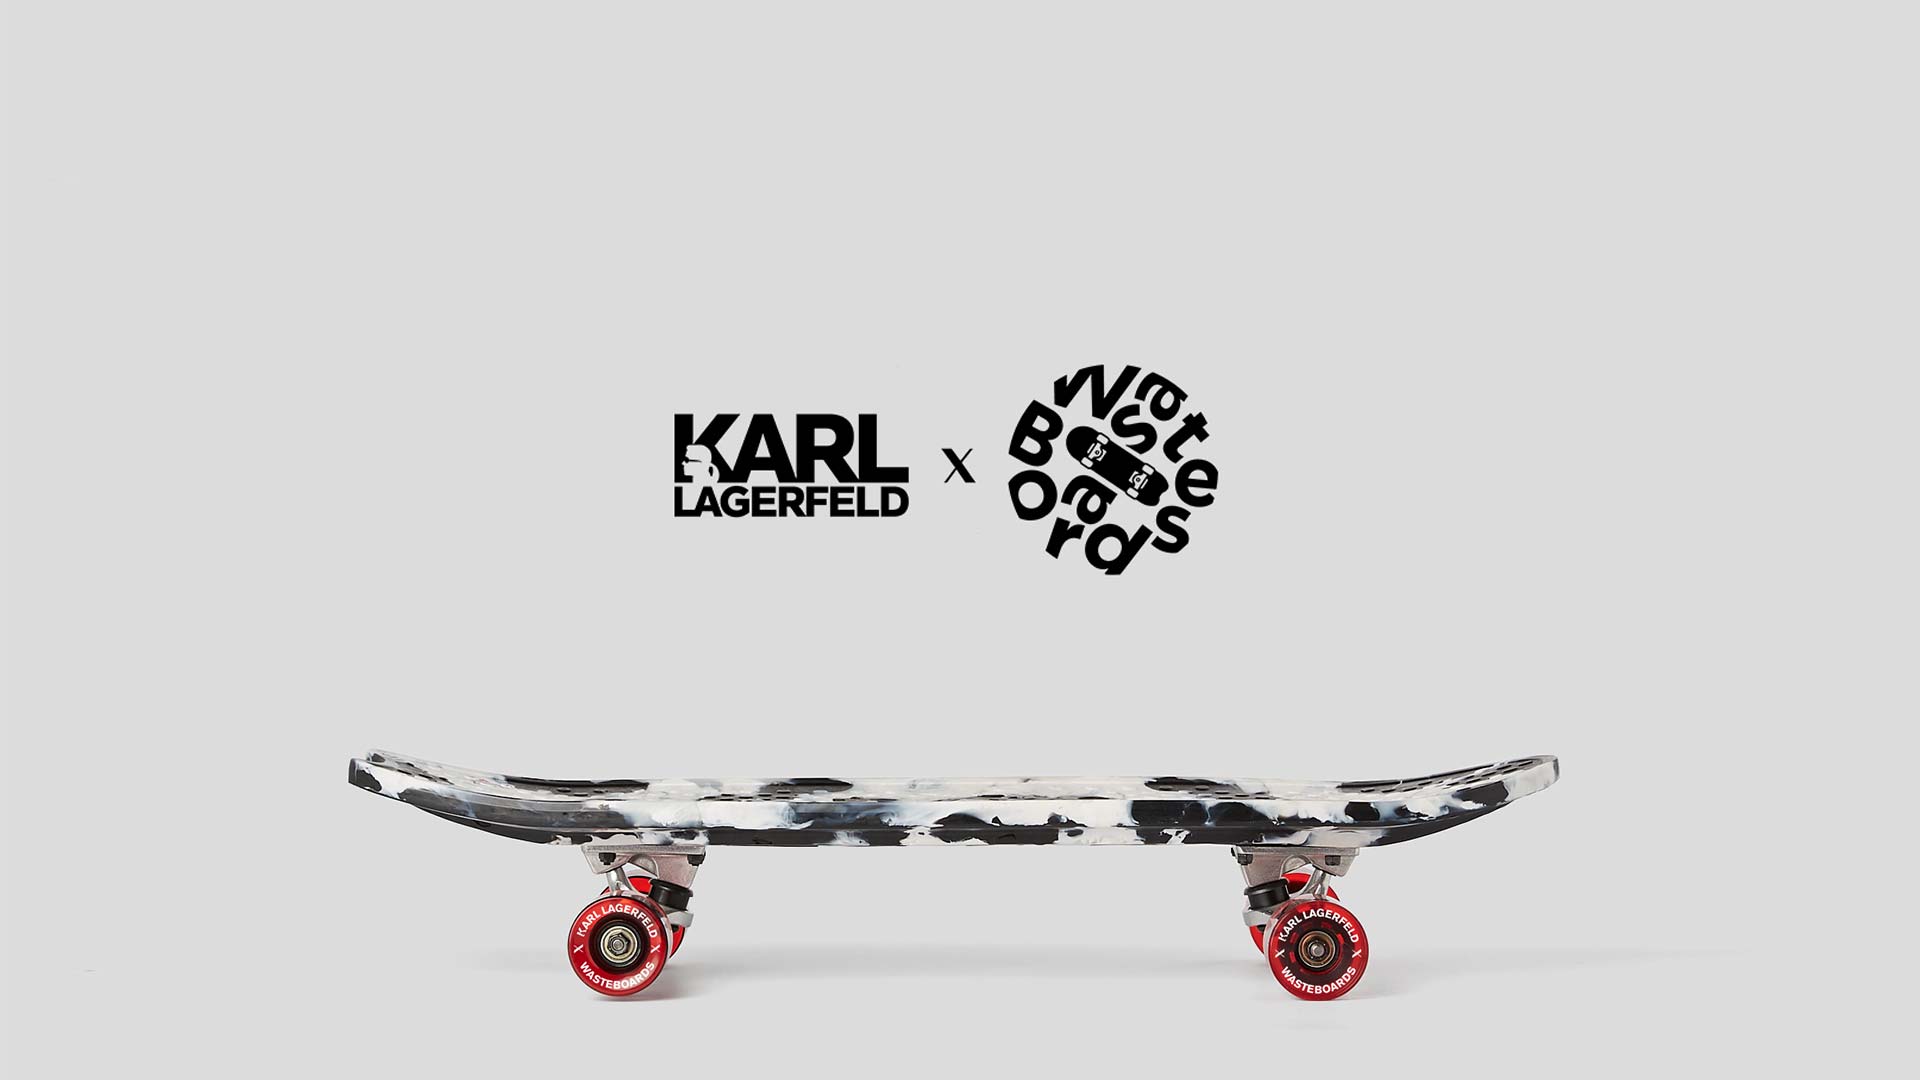 skateboard from the collaboration between Karl Lagerfeld and Wasteboards